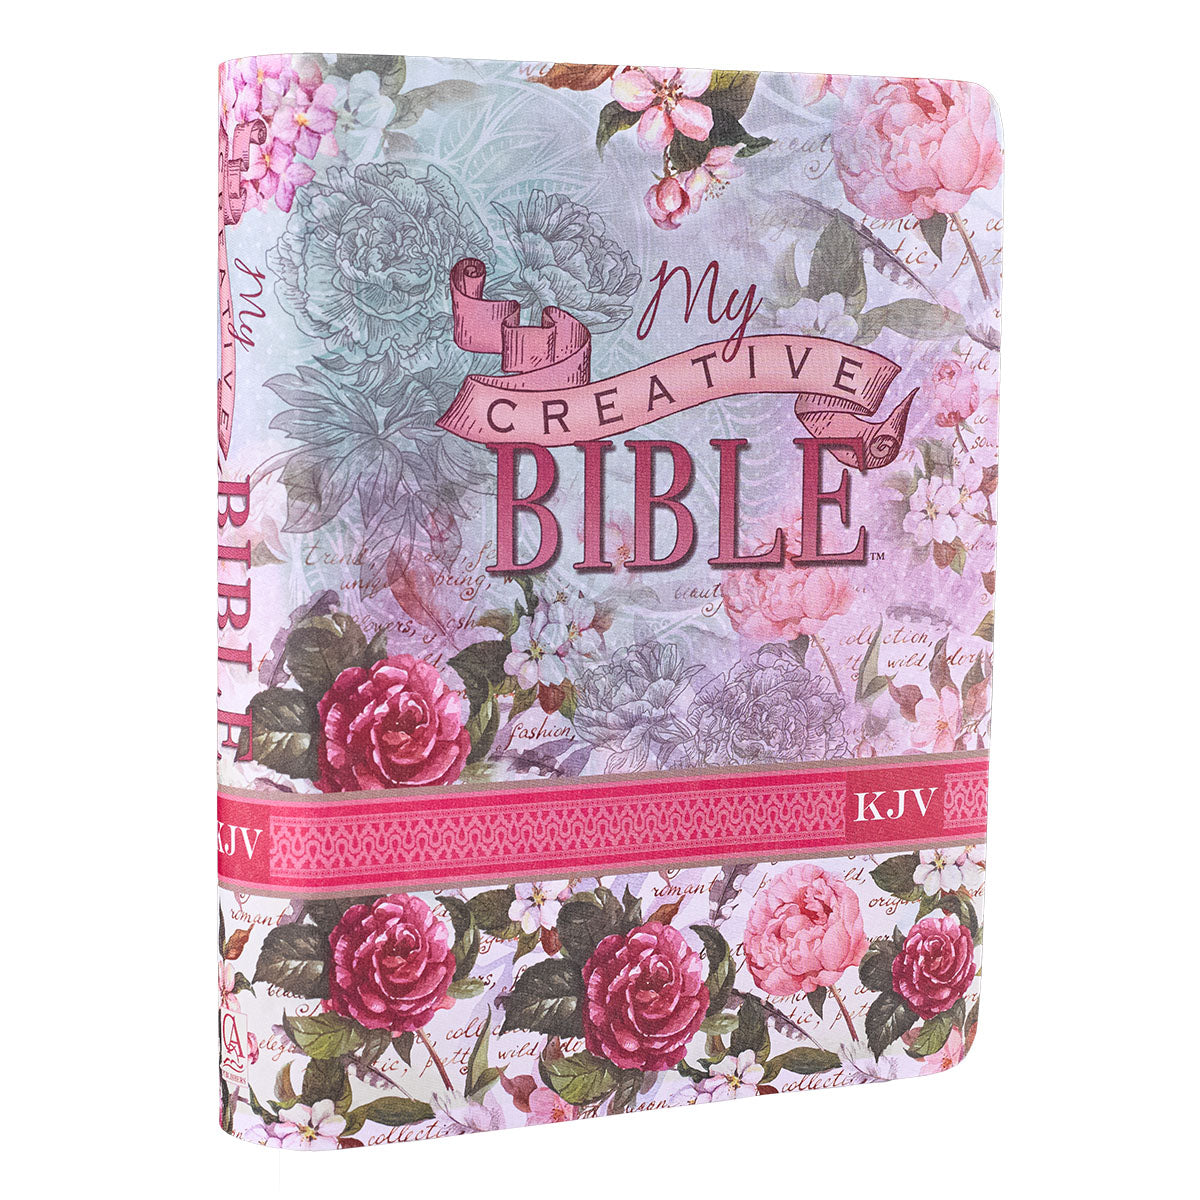 Image of My Creative Bible KJV: Silken Flexcover Bible for Creative Journaling other